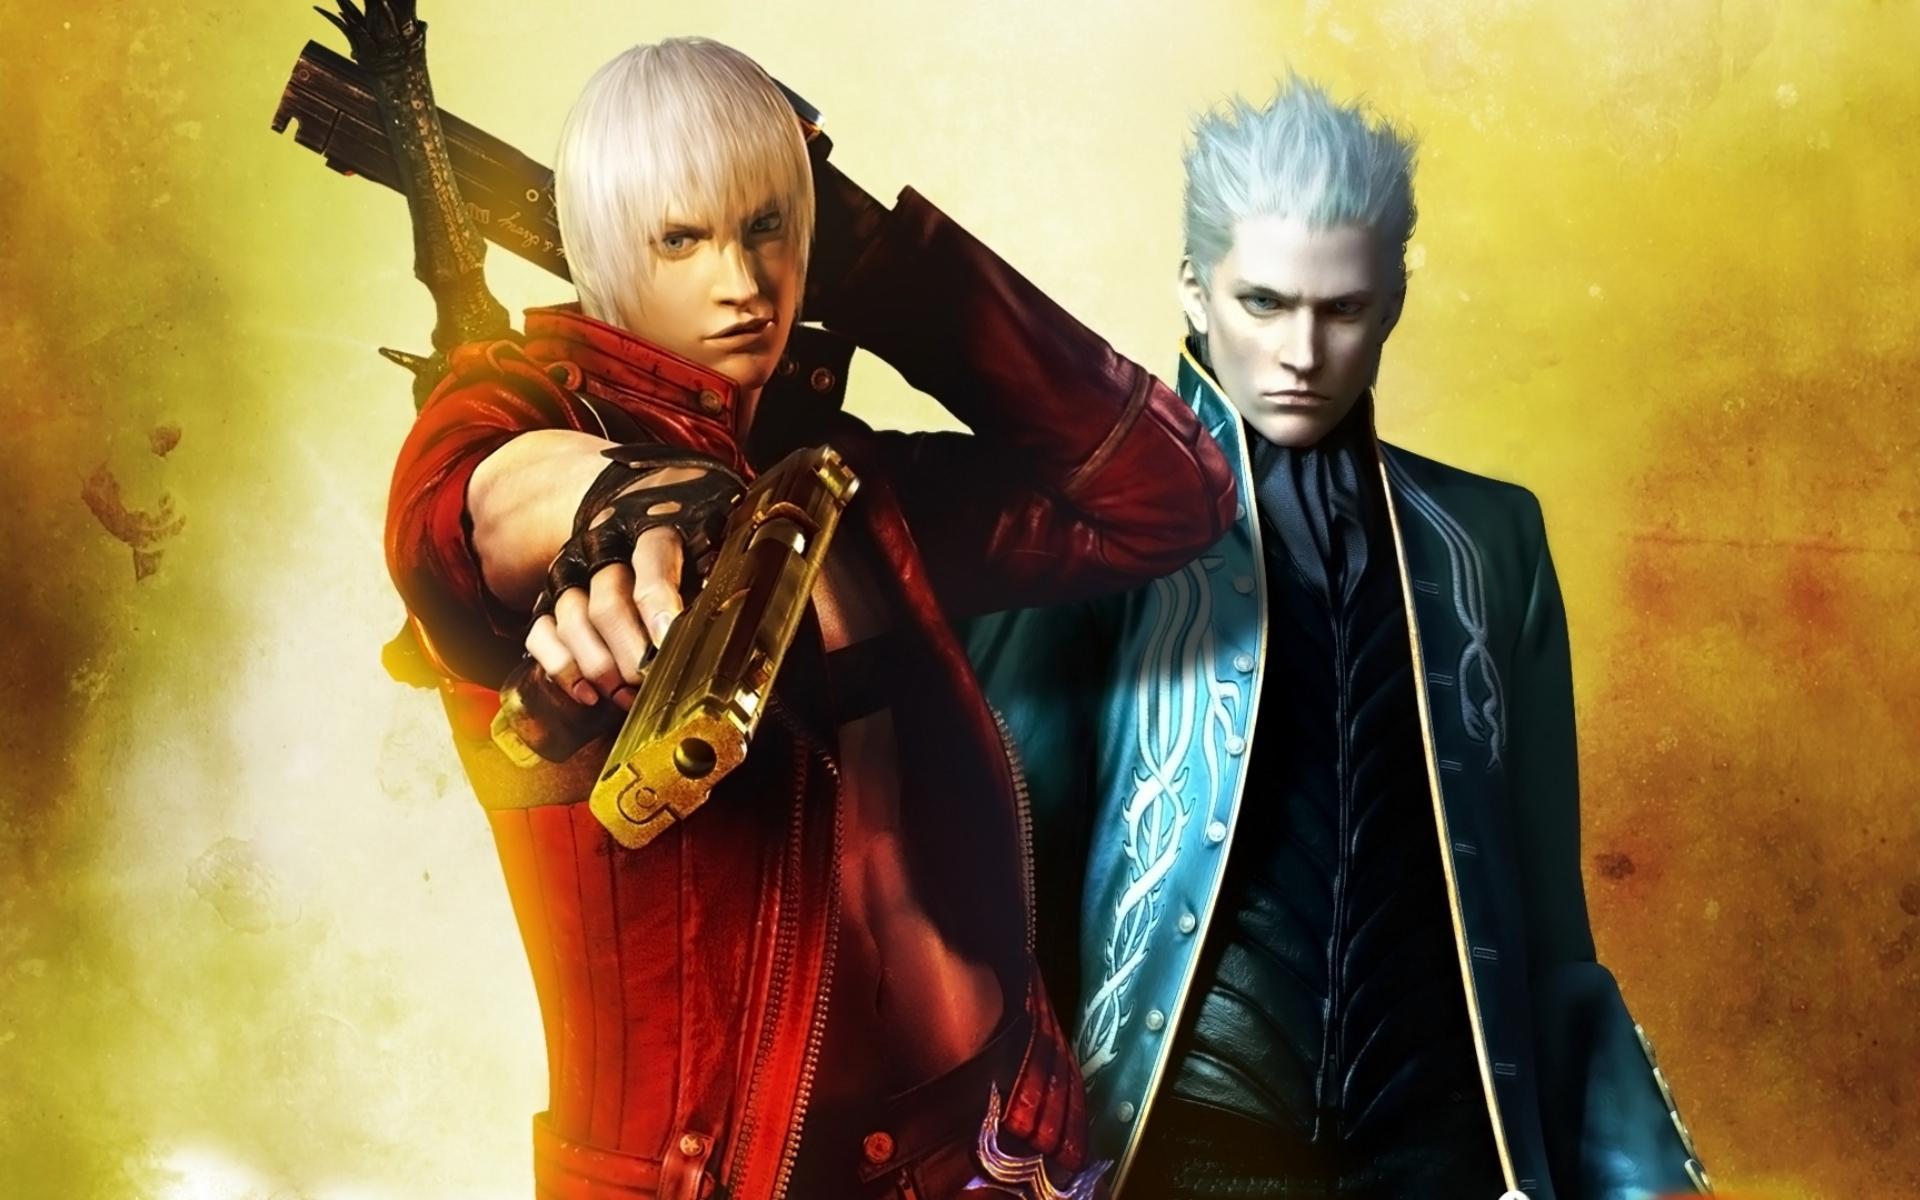 ThrowbackThursday: Devil May Cry